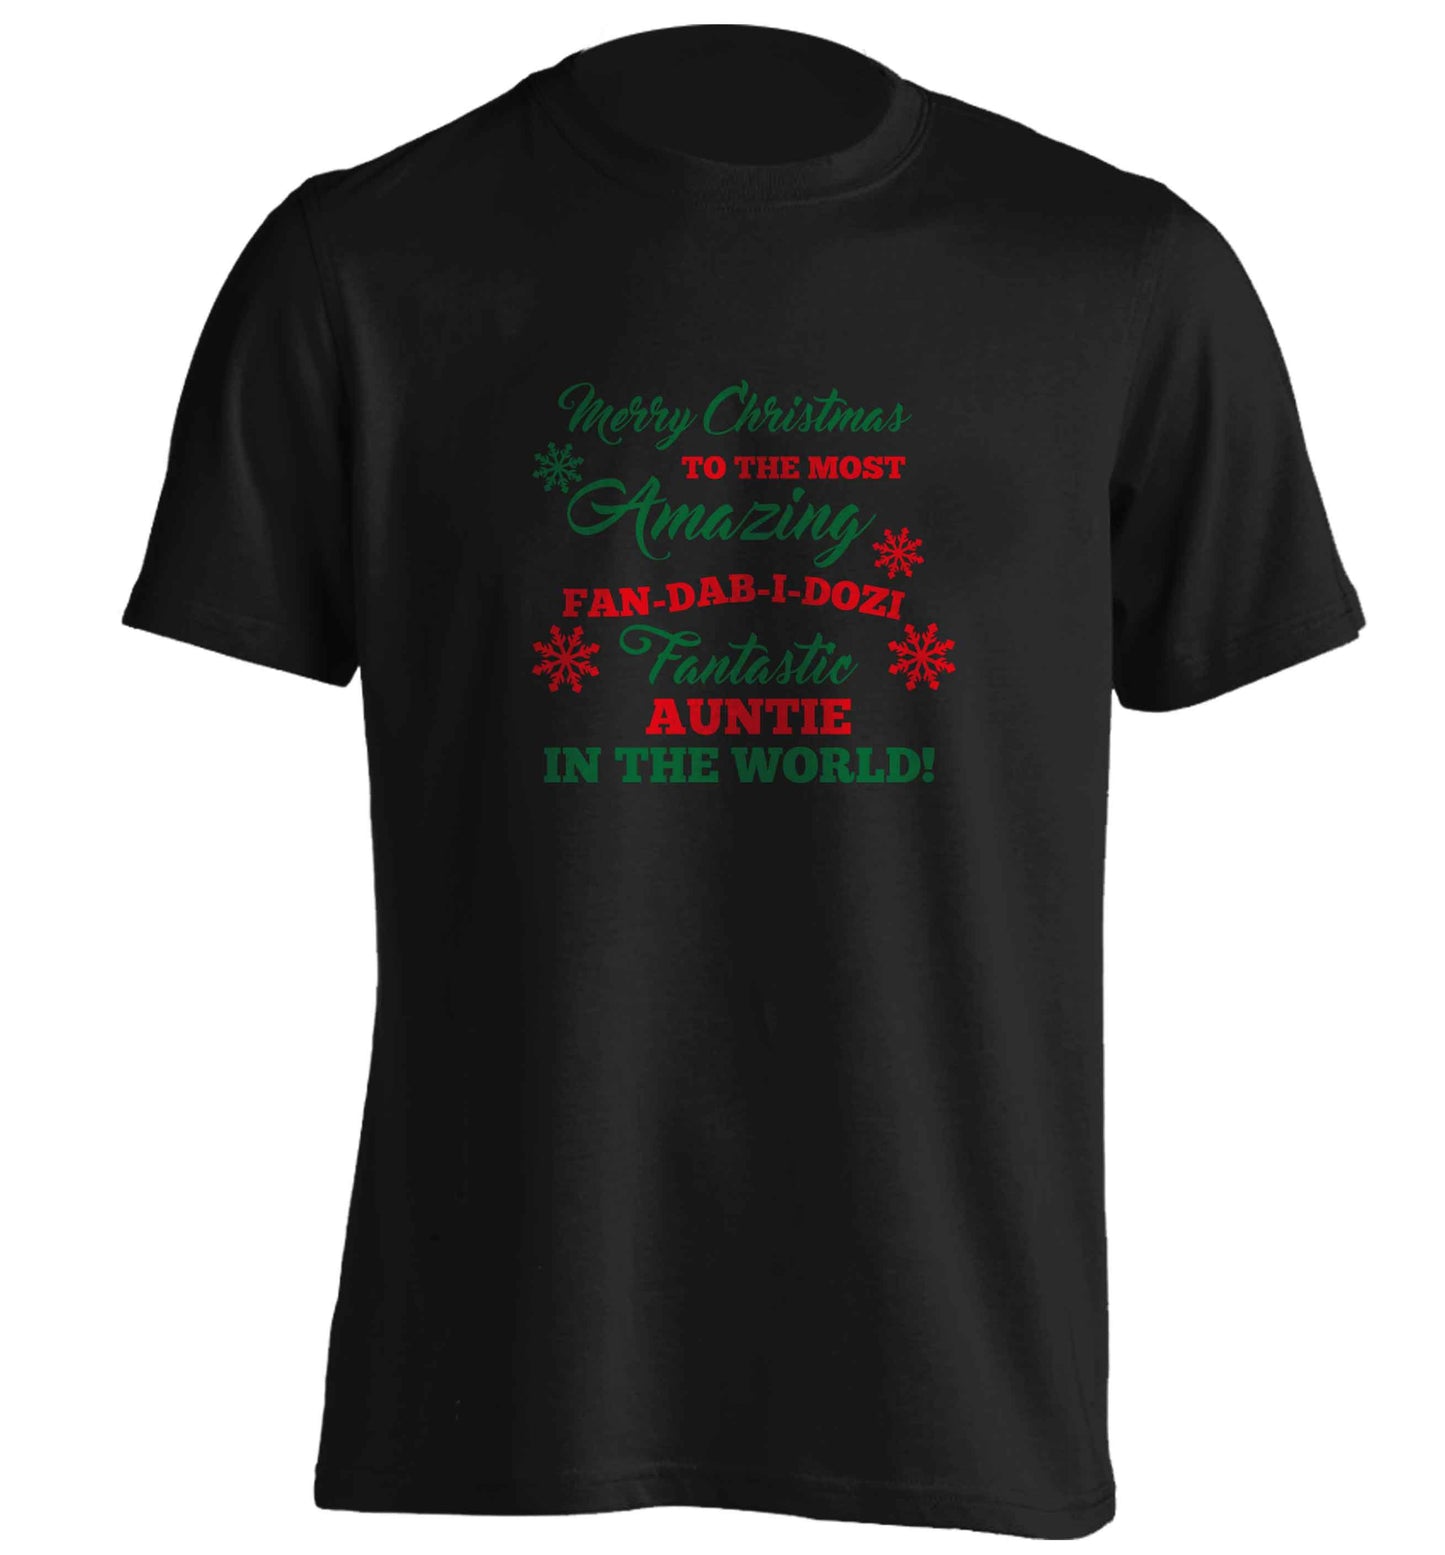 Merry Christmas to the most amazing fan-dab-i-dozi fantasic Auntie in the world adults unisex black Tshirt 2XL